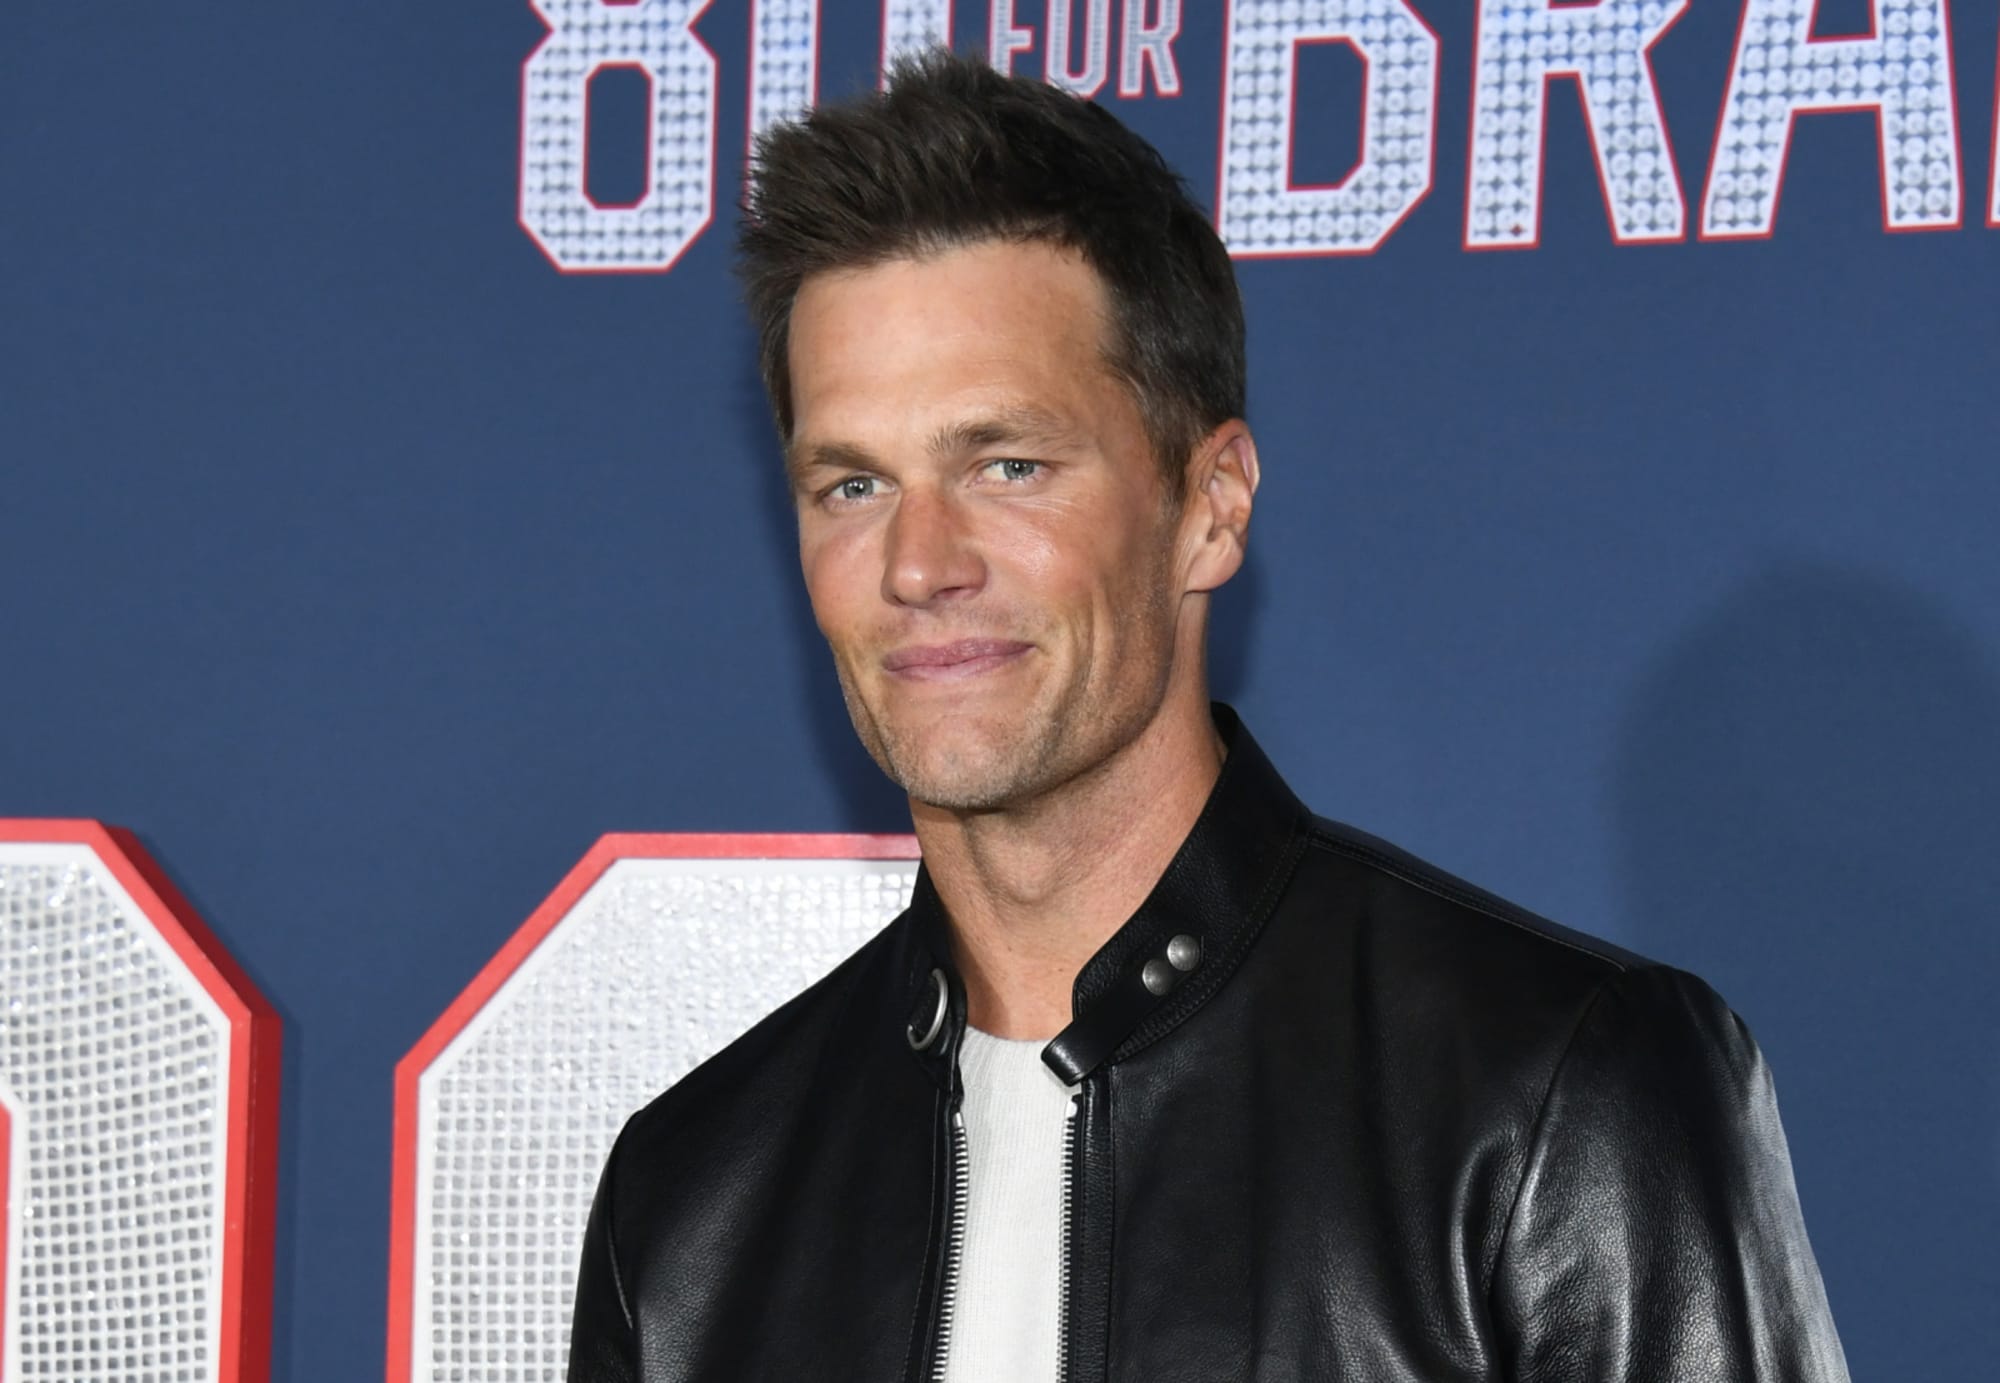 Tom Brady net worth and family life Everything to know about post